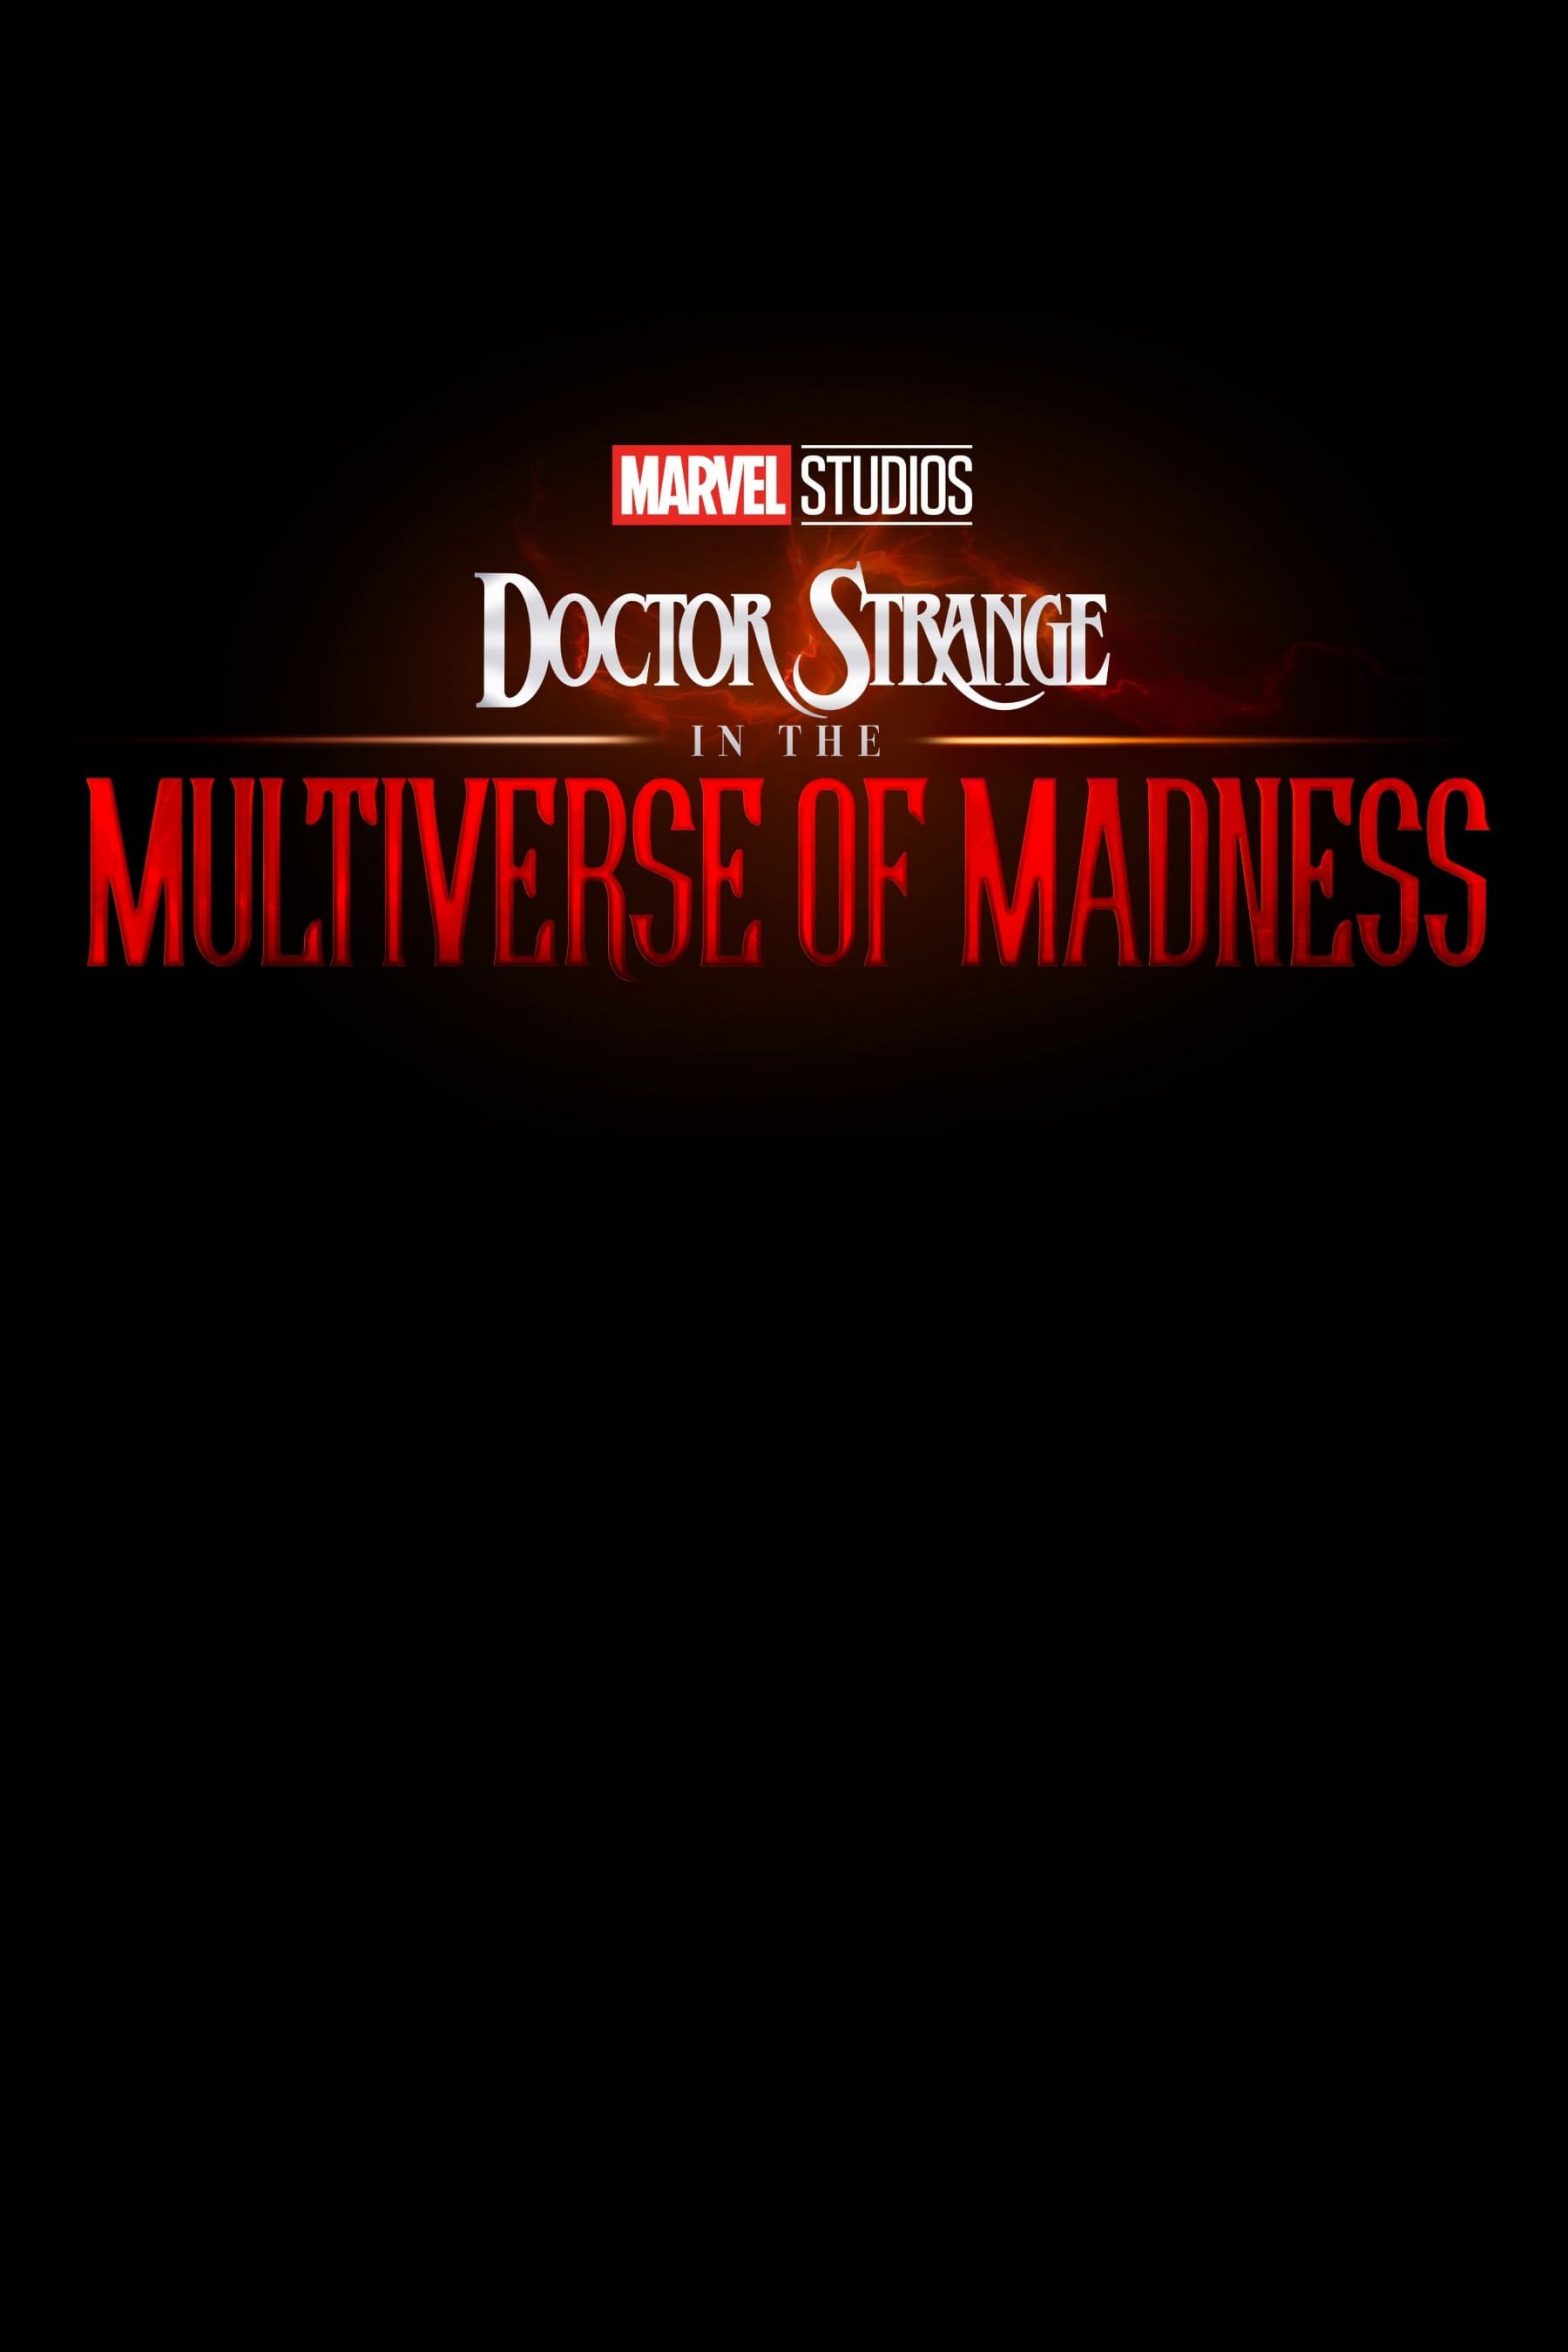 Poster for the movie "Doctor Strange in the Multiverse of Madness"